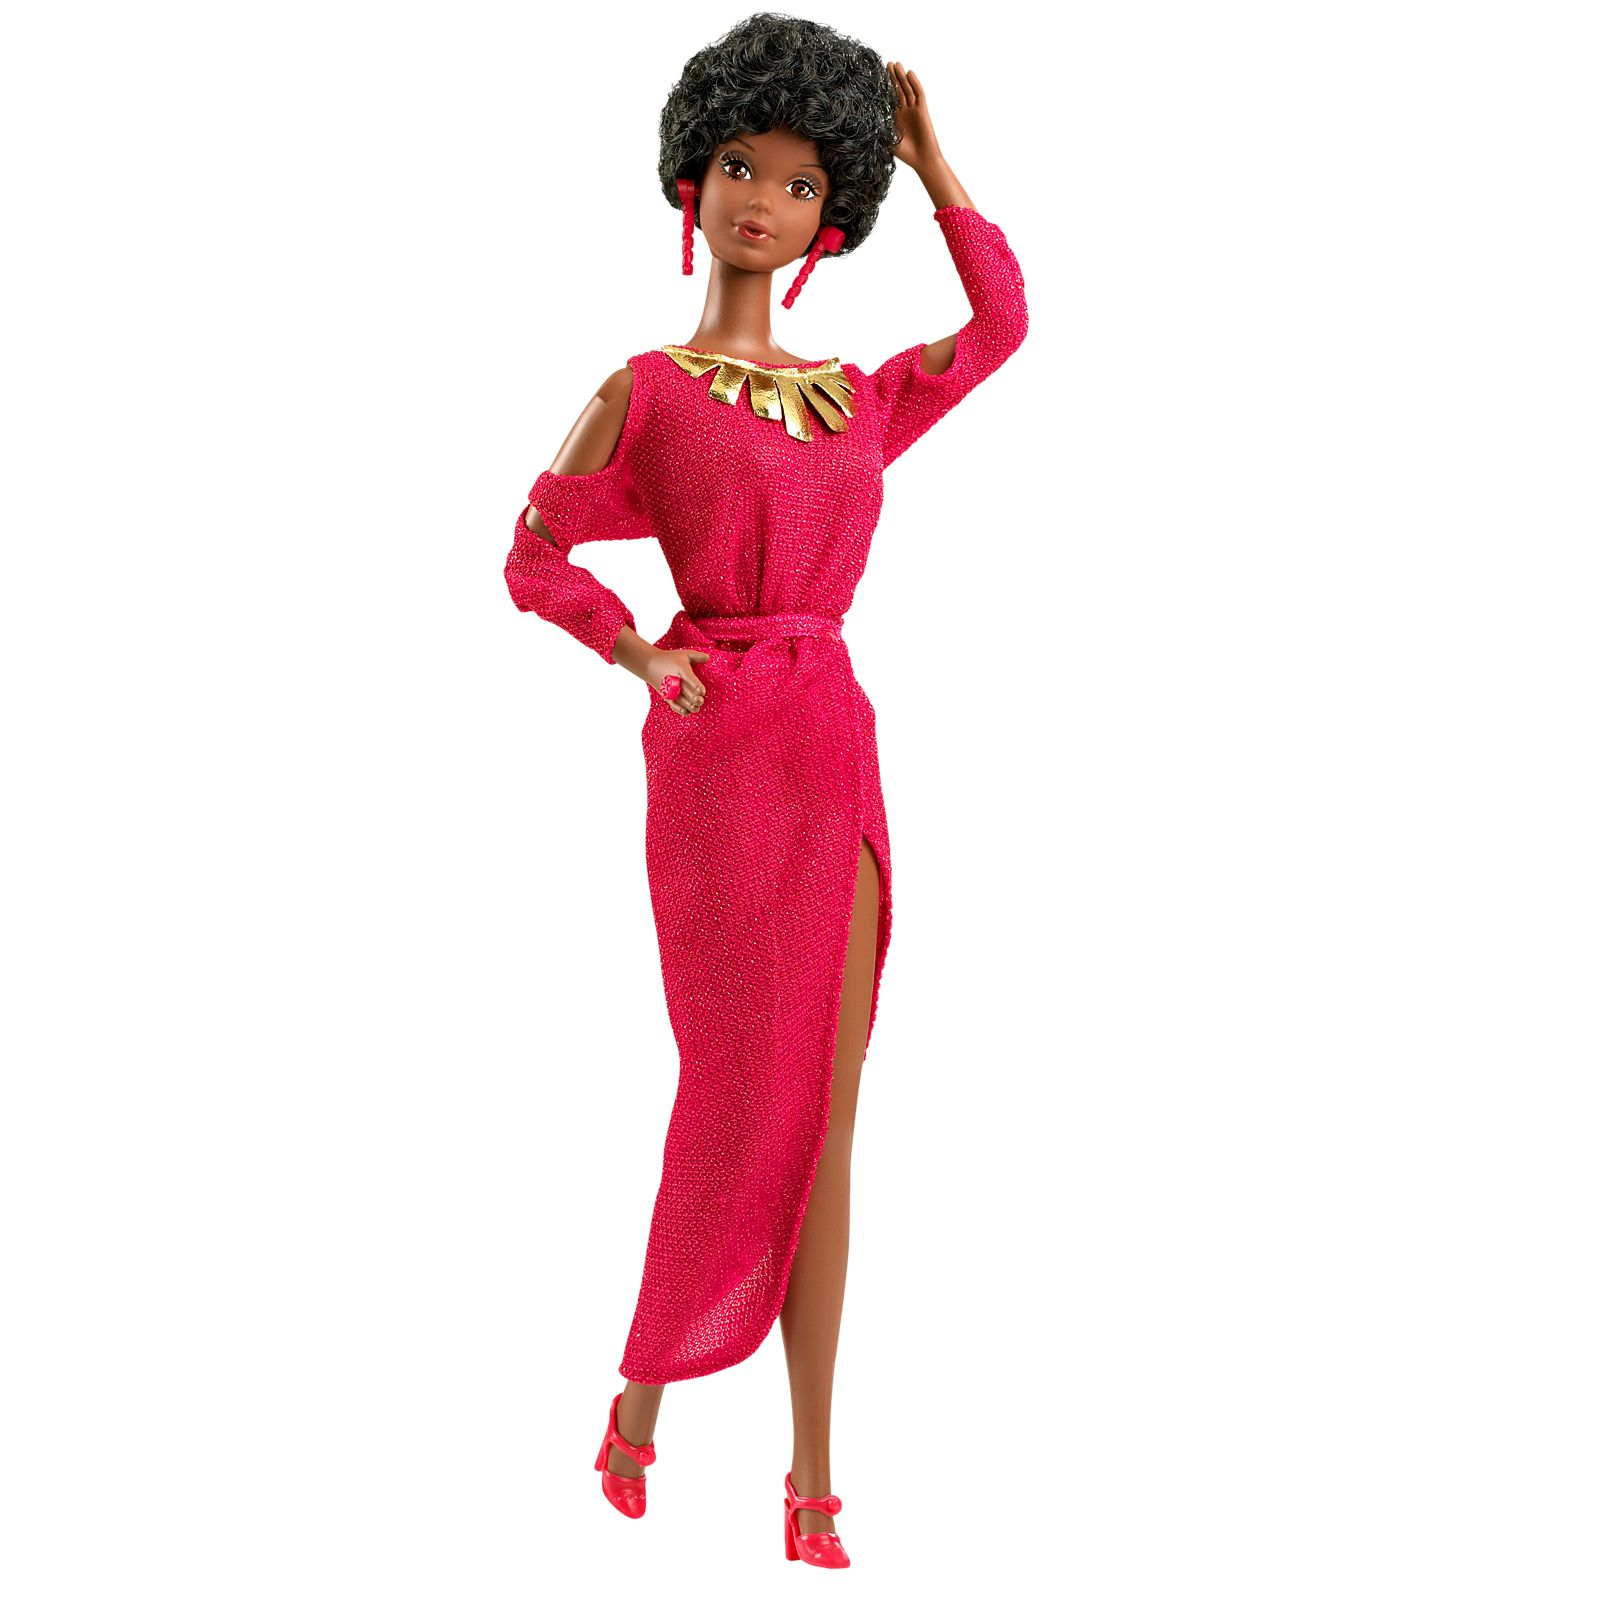 Black Barbie doll wearing a red dress with slits on the shoulders